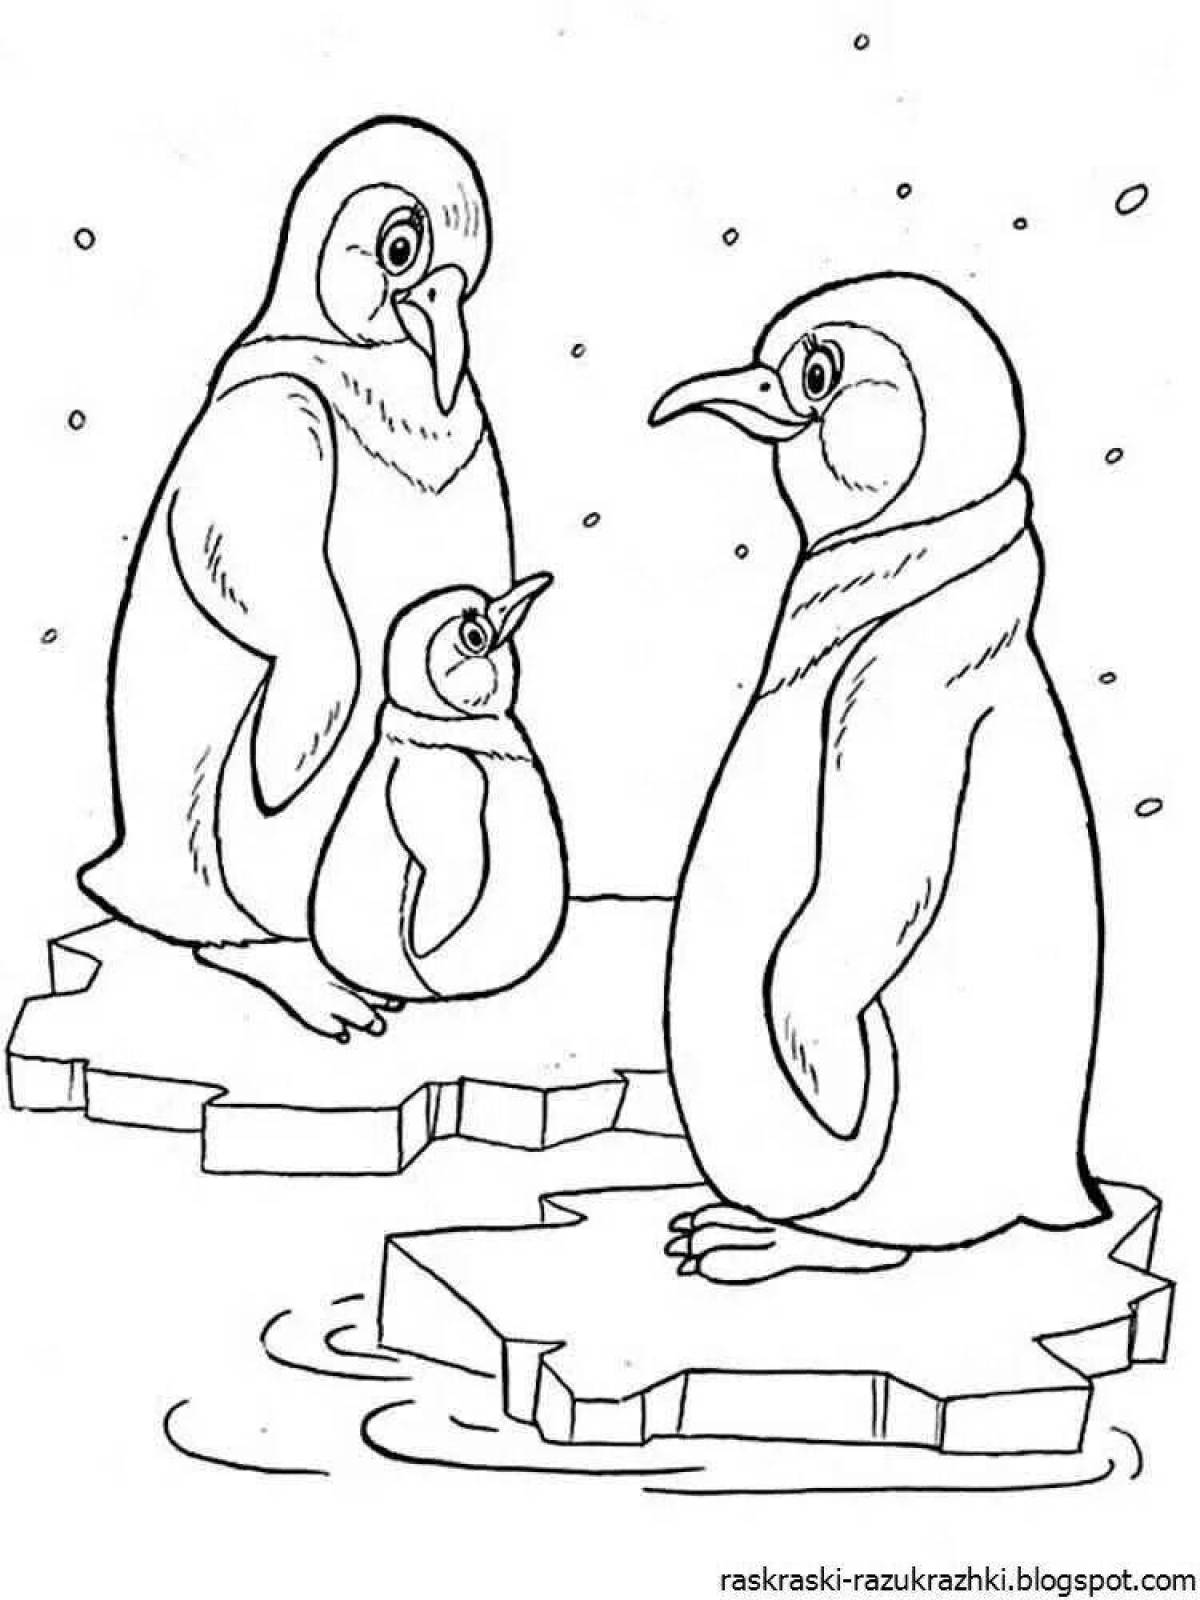 Penguins for children 5 6 years old #4